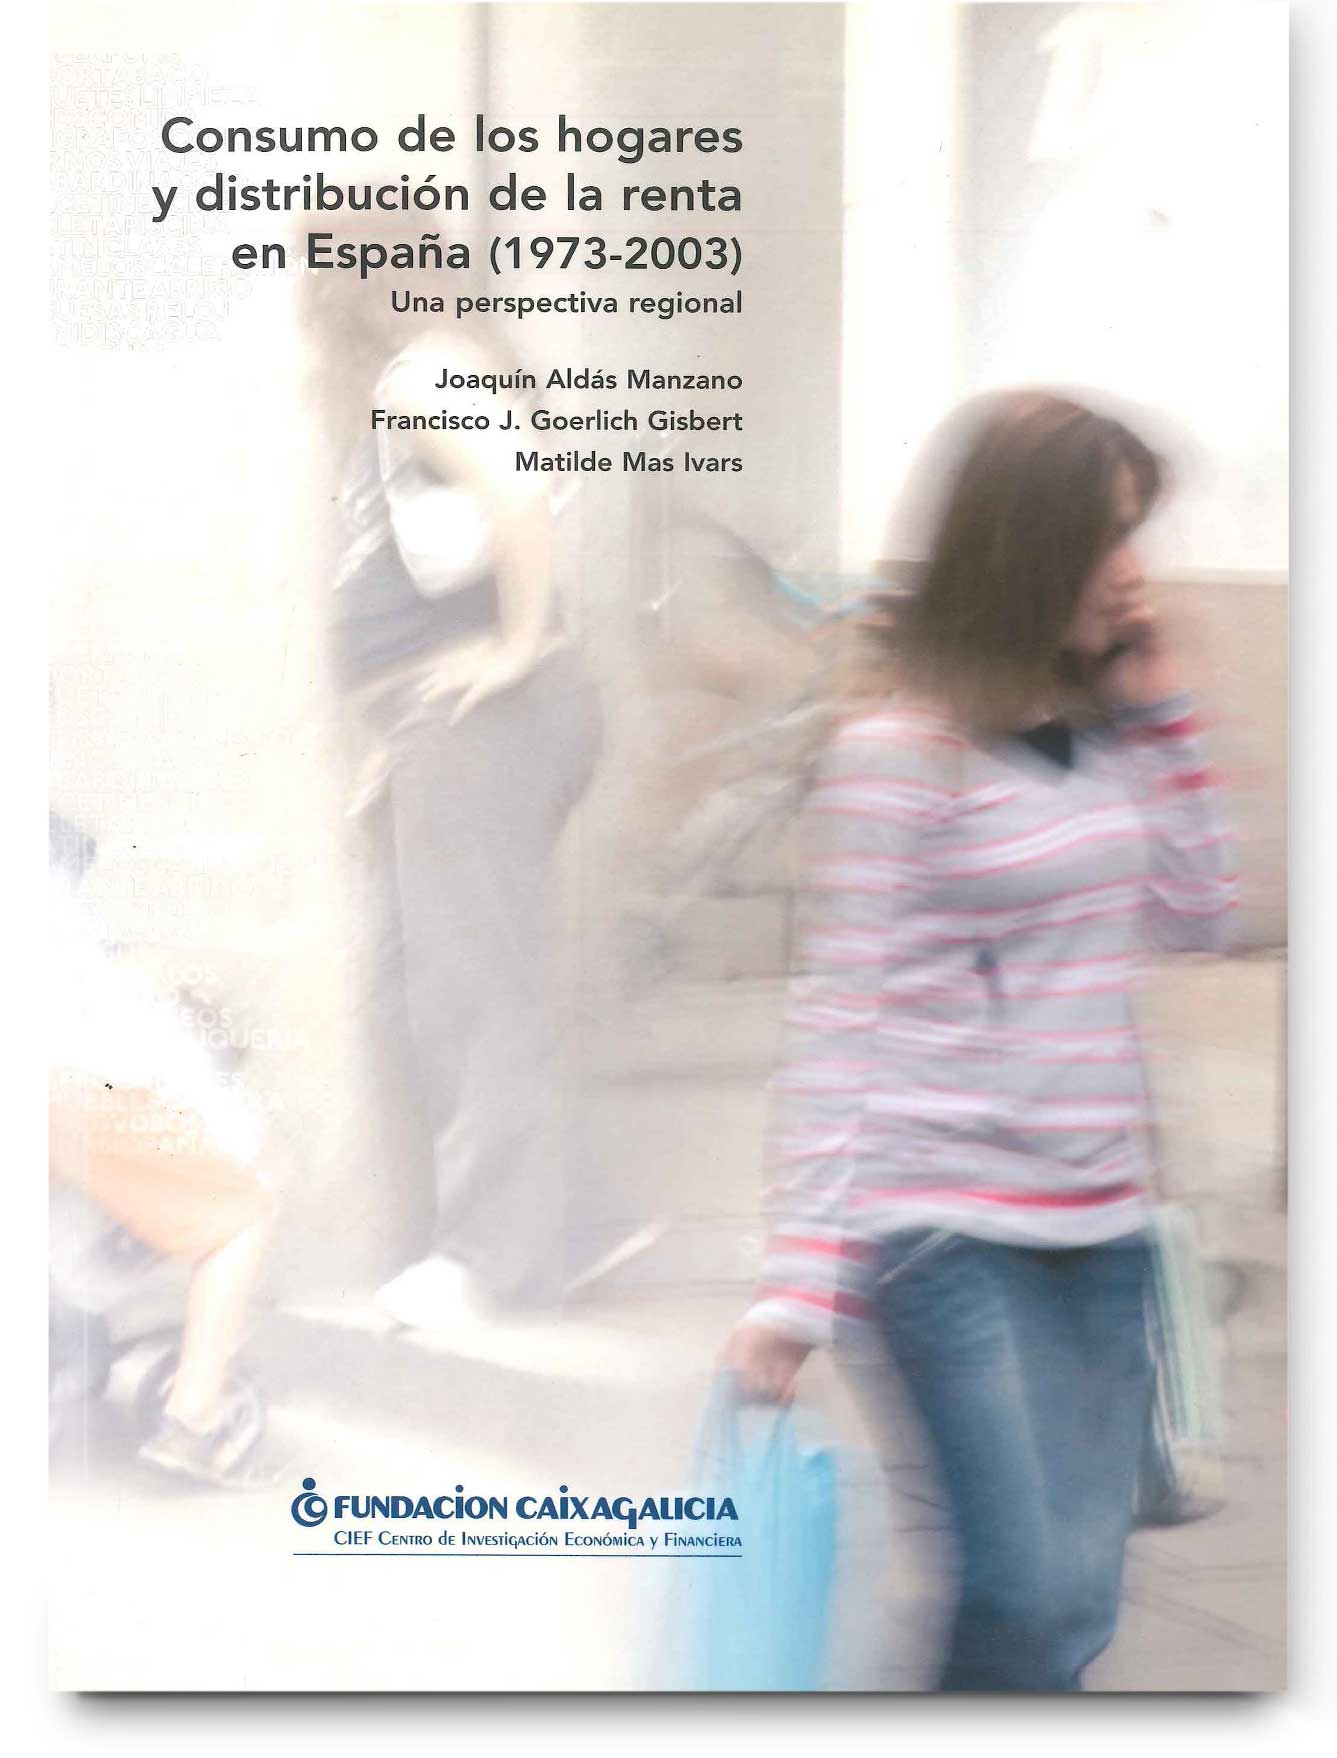 Household expenditure and income distribution in Spain (1973-2003): A regional comparison